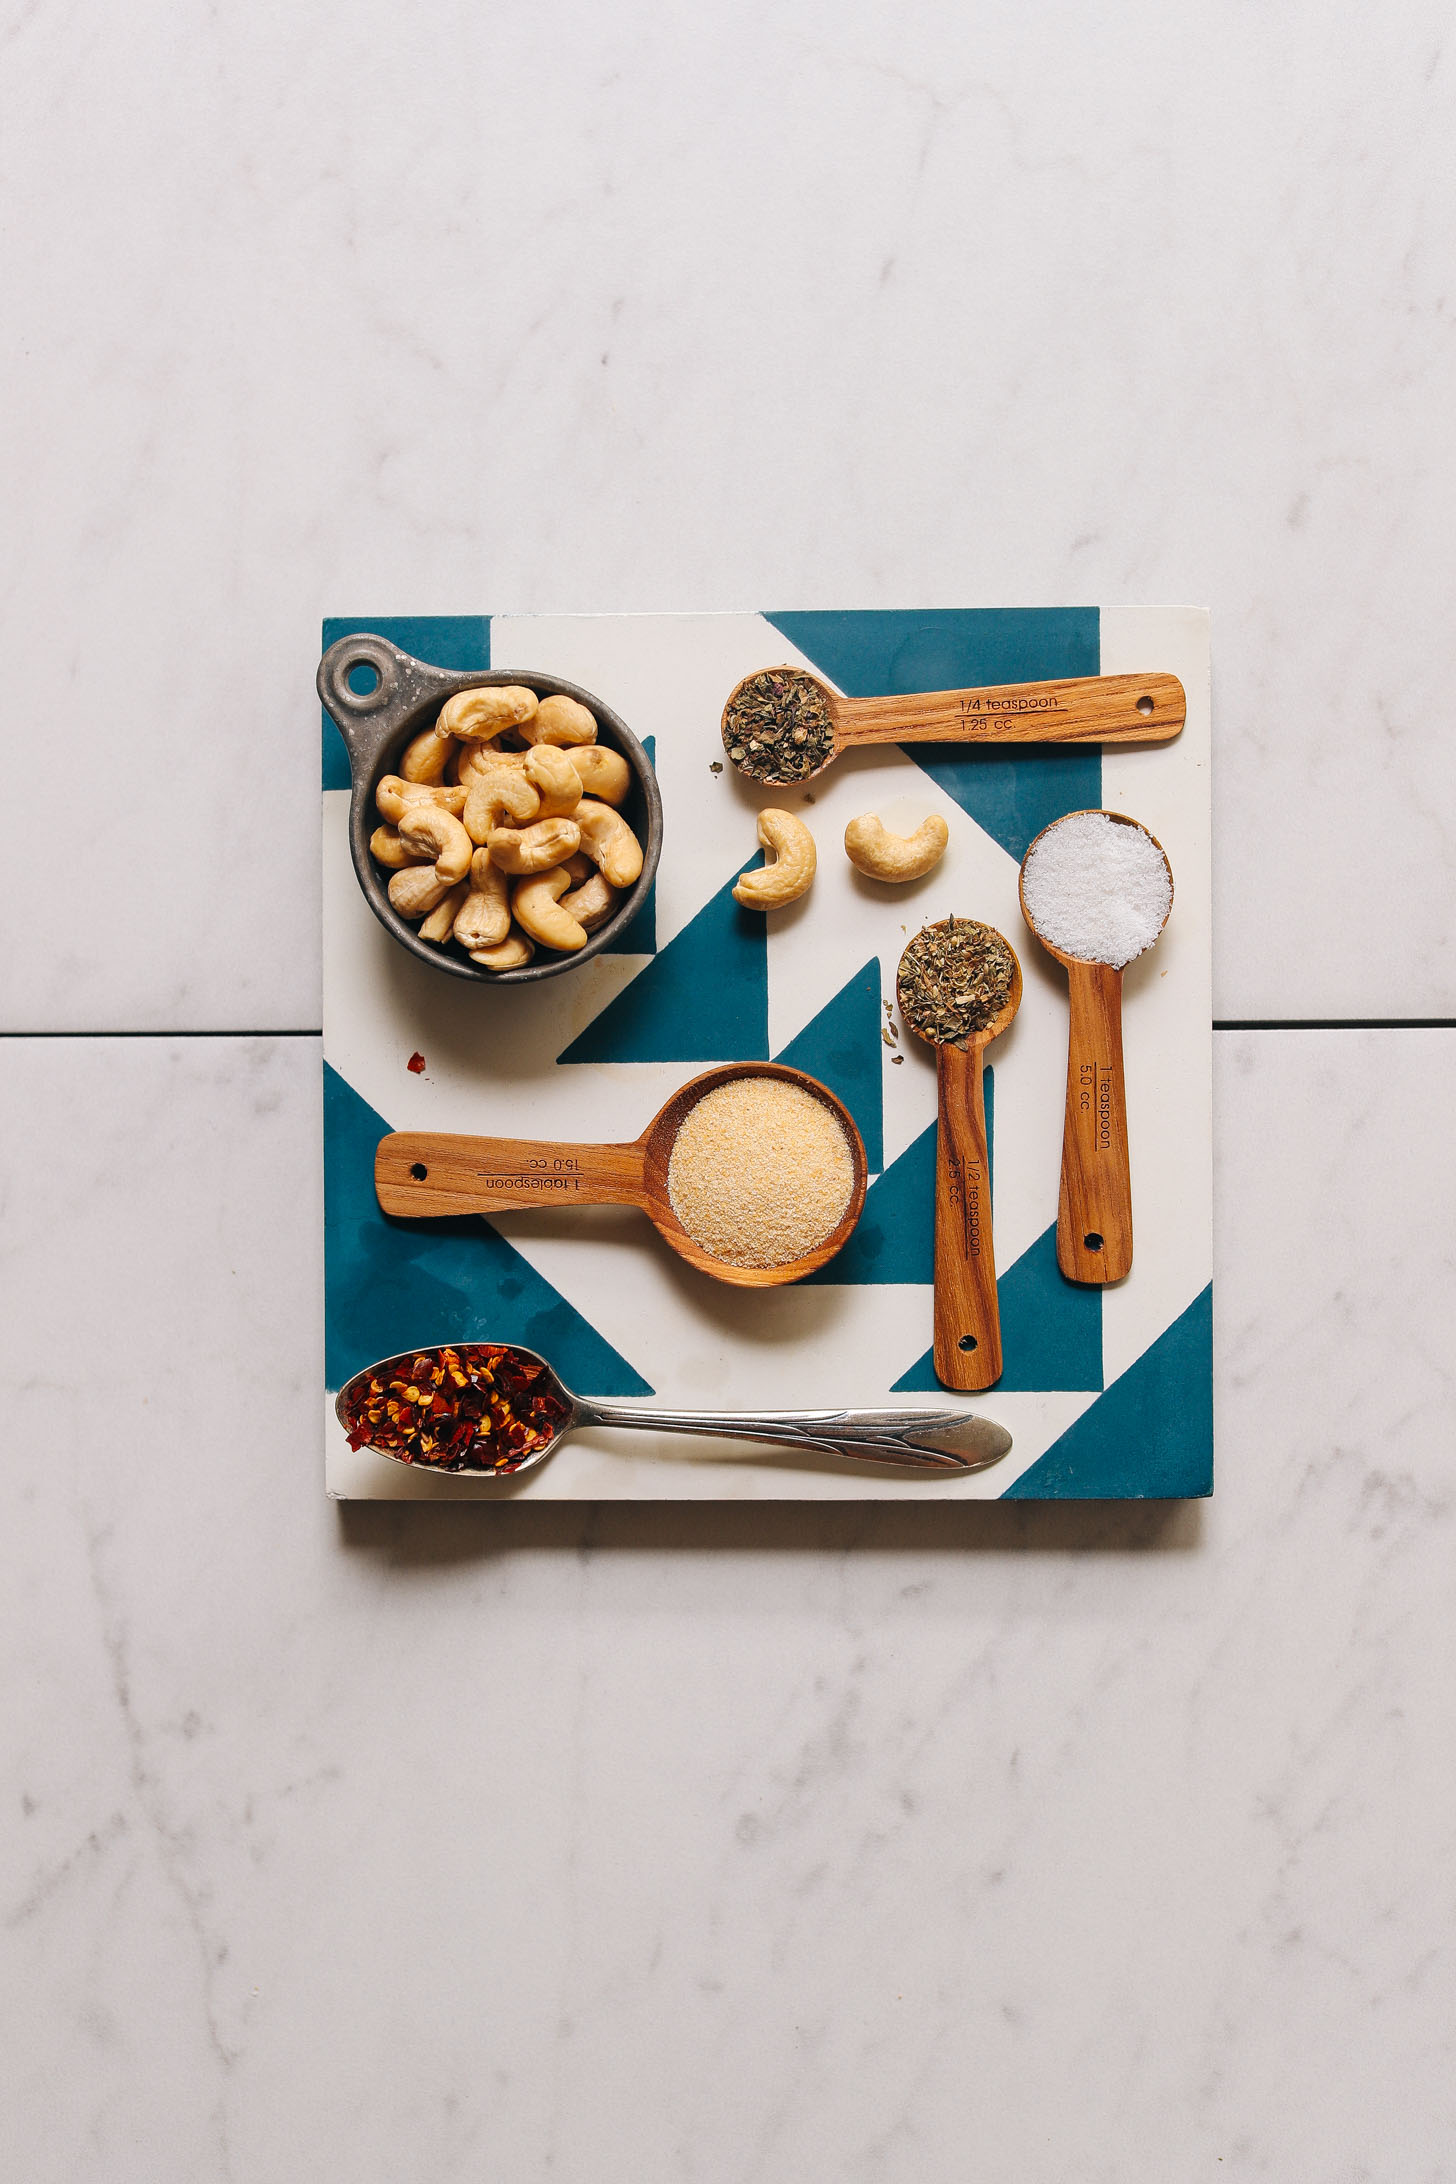 Tile with ingredients for making yeast-free Vegan Cashew Parmesan cheese